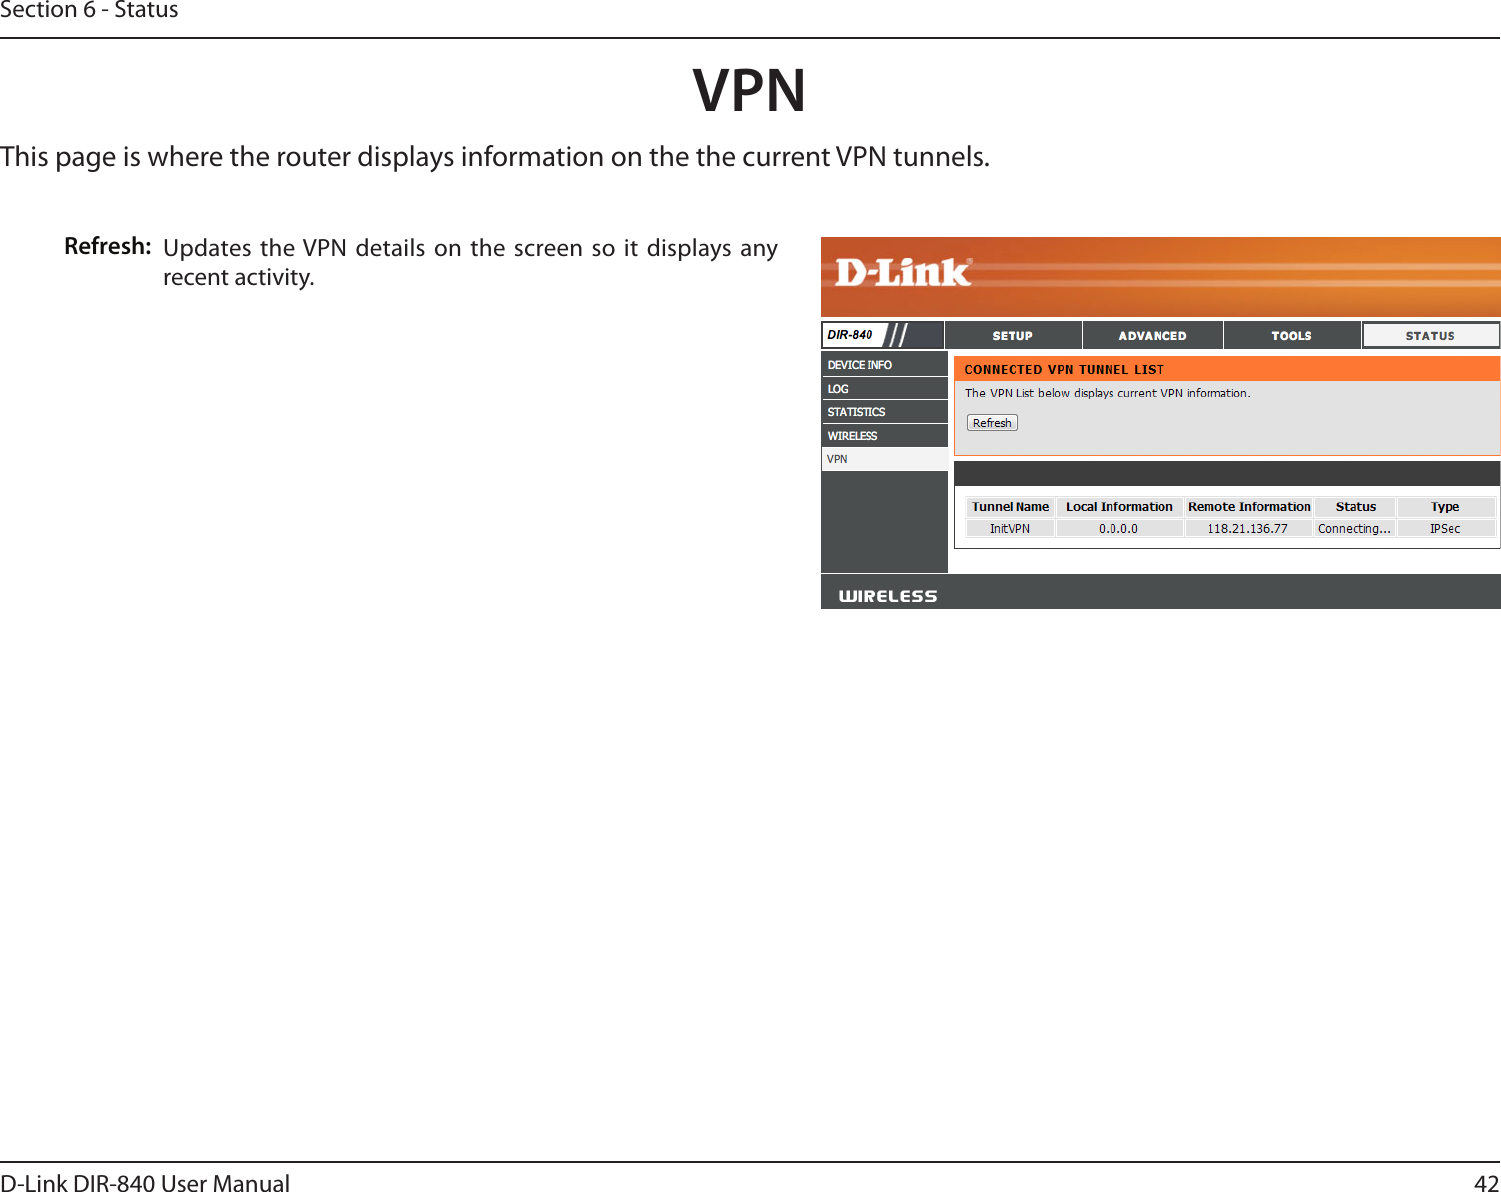 42D-Link DIR-840 User ManualSection 6 - StatusVPNRefresh: Updates the VPN details on the screen so  it displays any recent activity.This page is where the router displays information on the the current VPN tunnels.